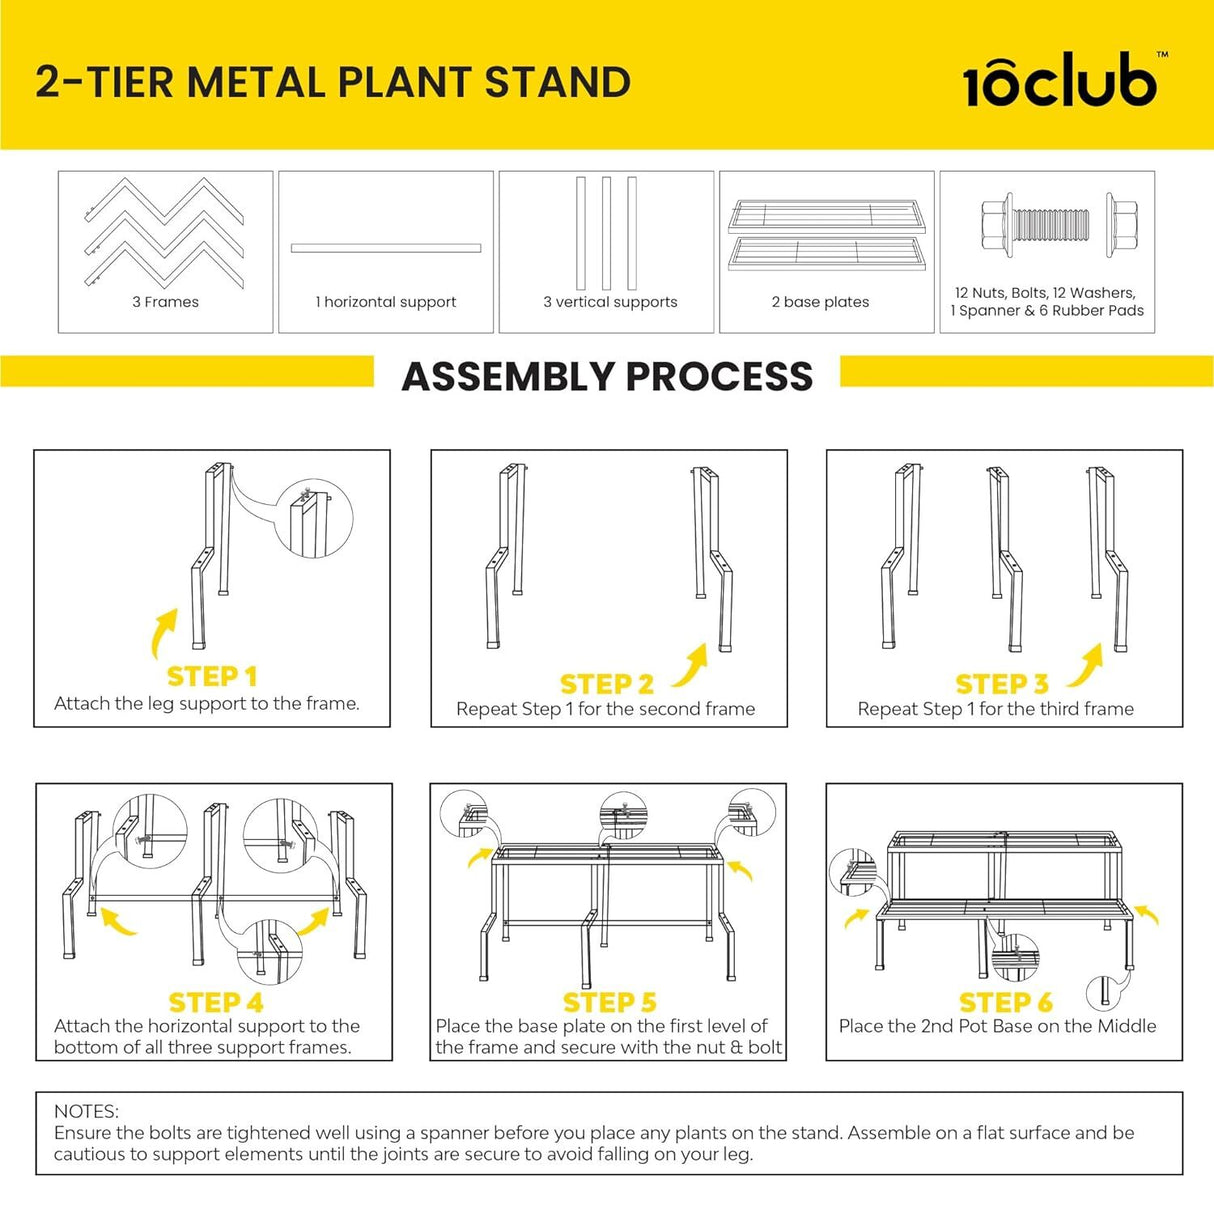 Assembly process of metal plant stand